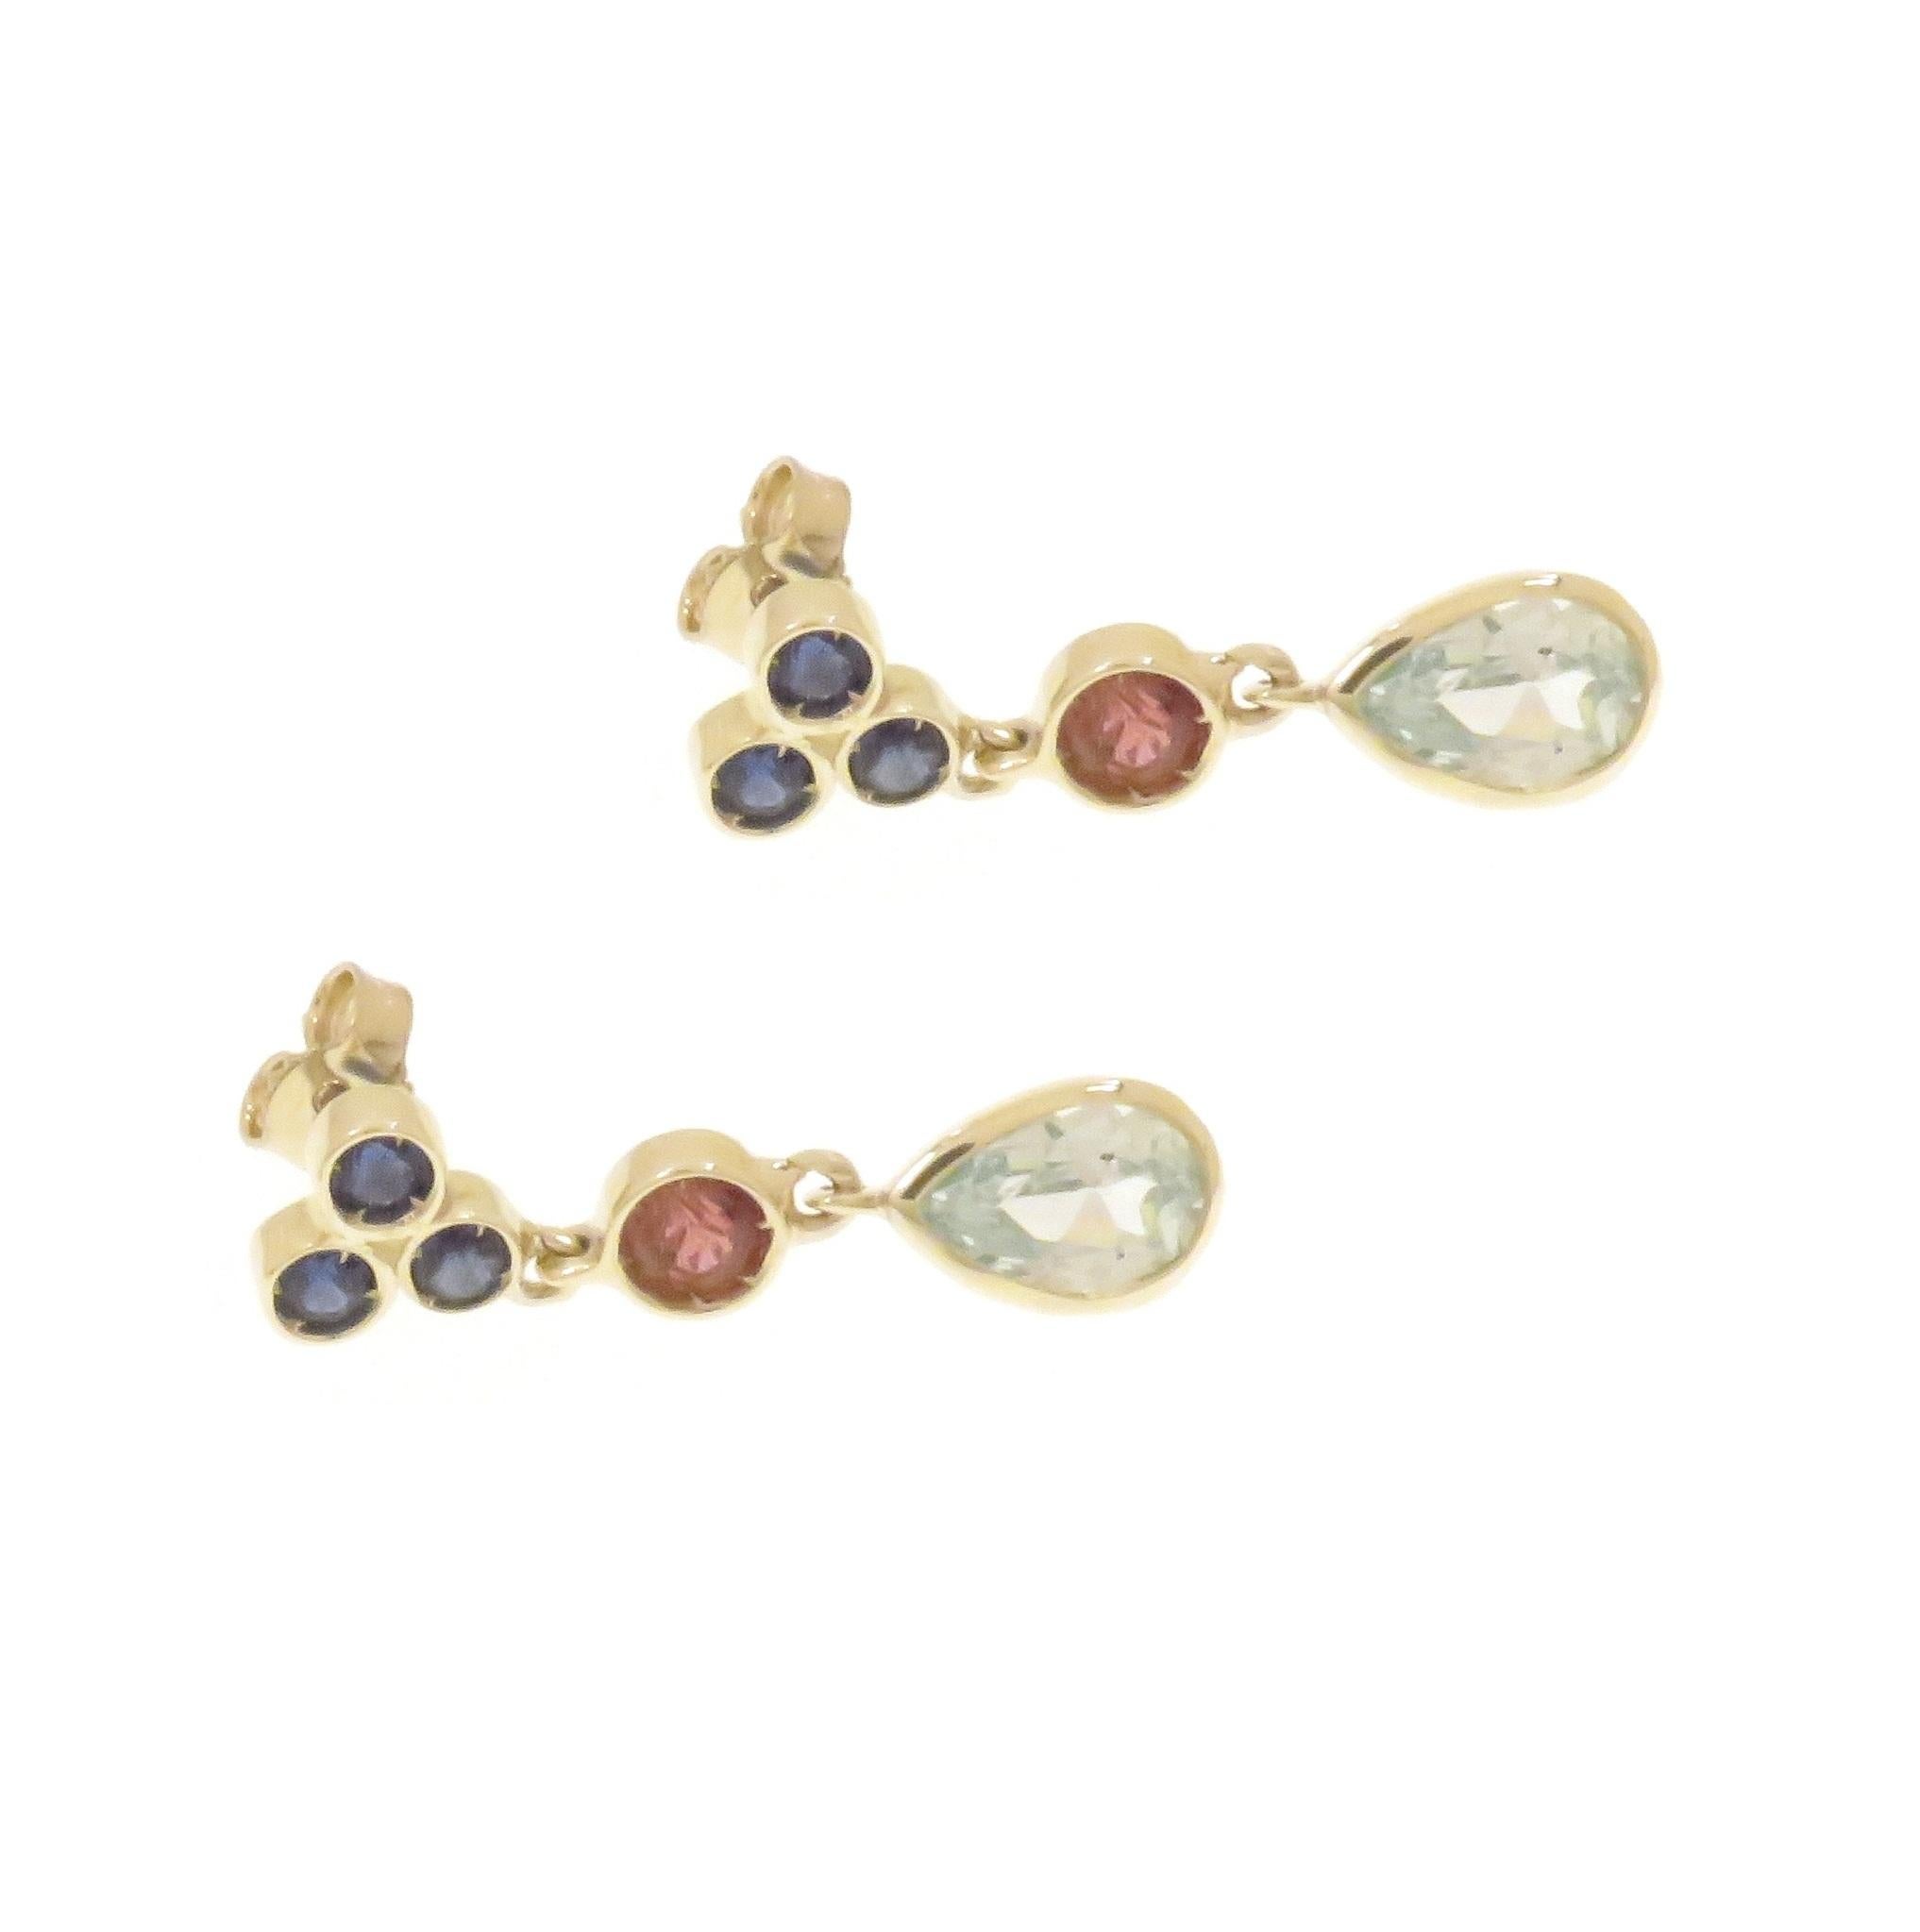 Lovely earrings featuring three gemstones: sapphires, pink tourmaline, blue topaz. Three round sapphires form a tringle at the ear lobe, the pink tourmaline in the middle is followed by a sparkling blue topaz drop, Crafted in 9 karat white gold. The